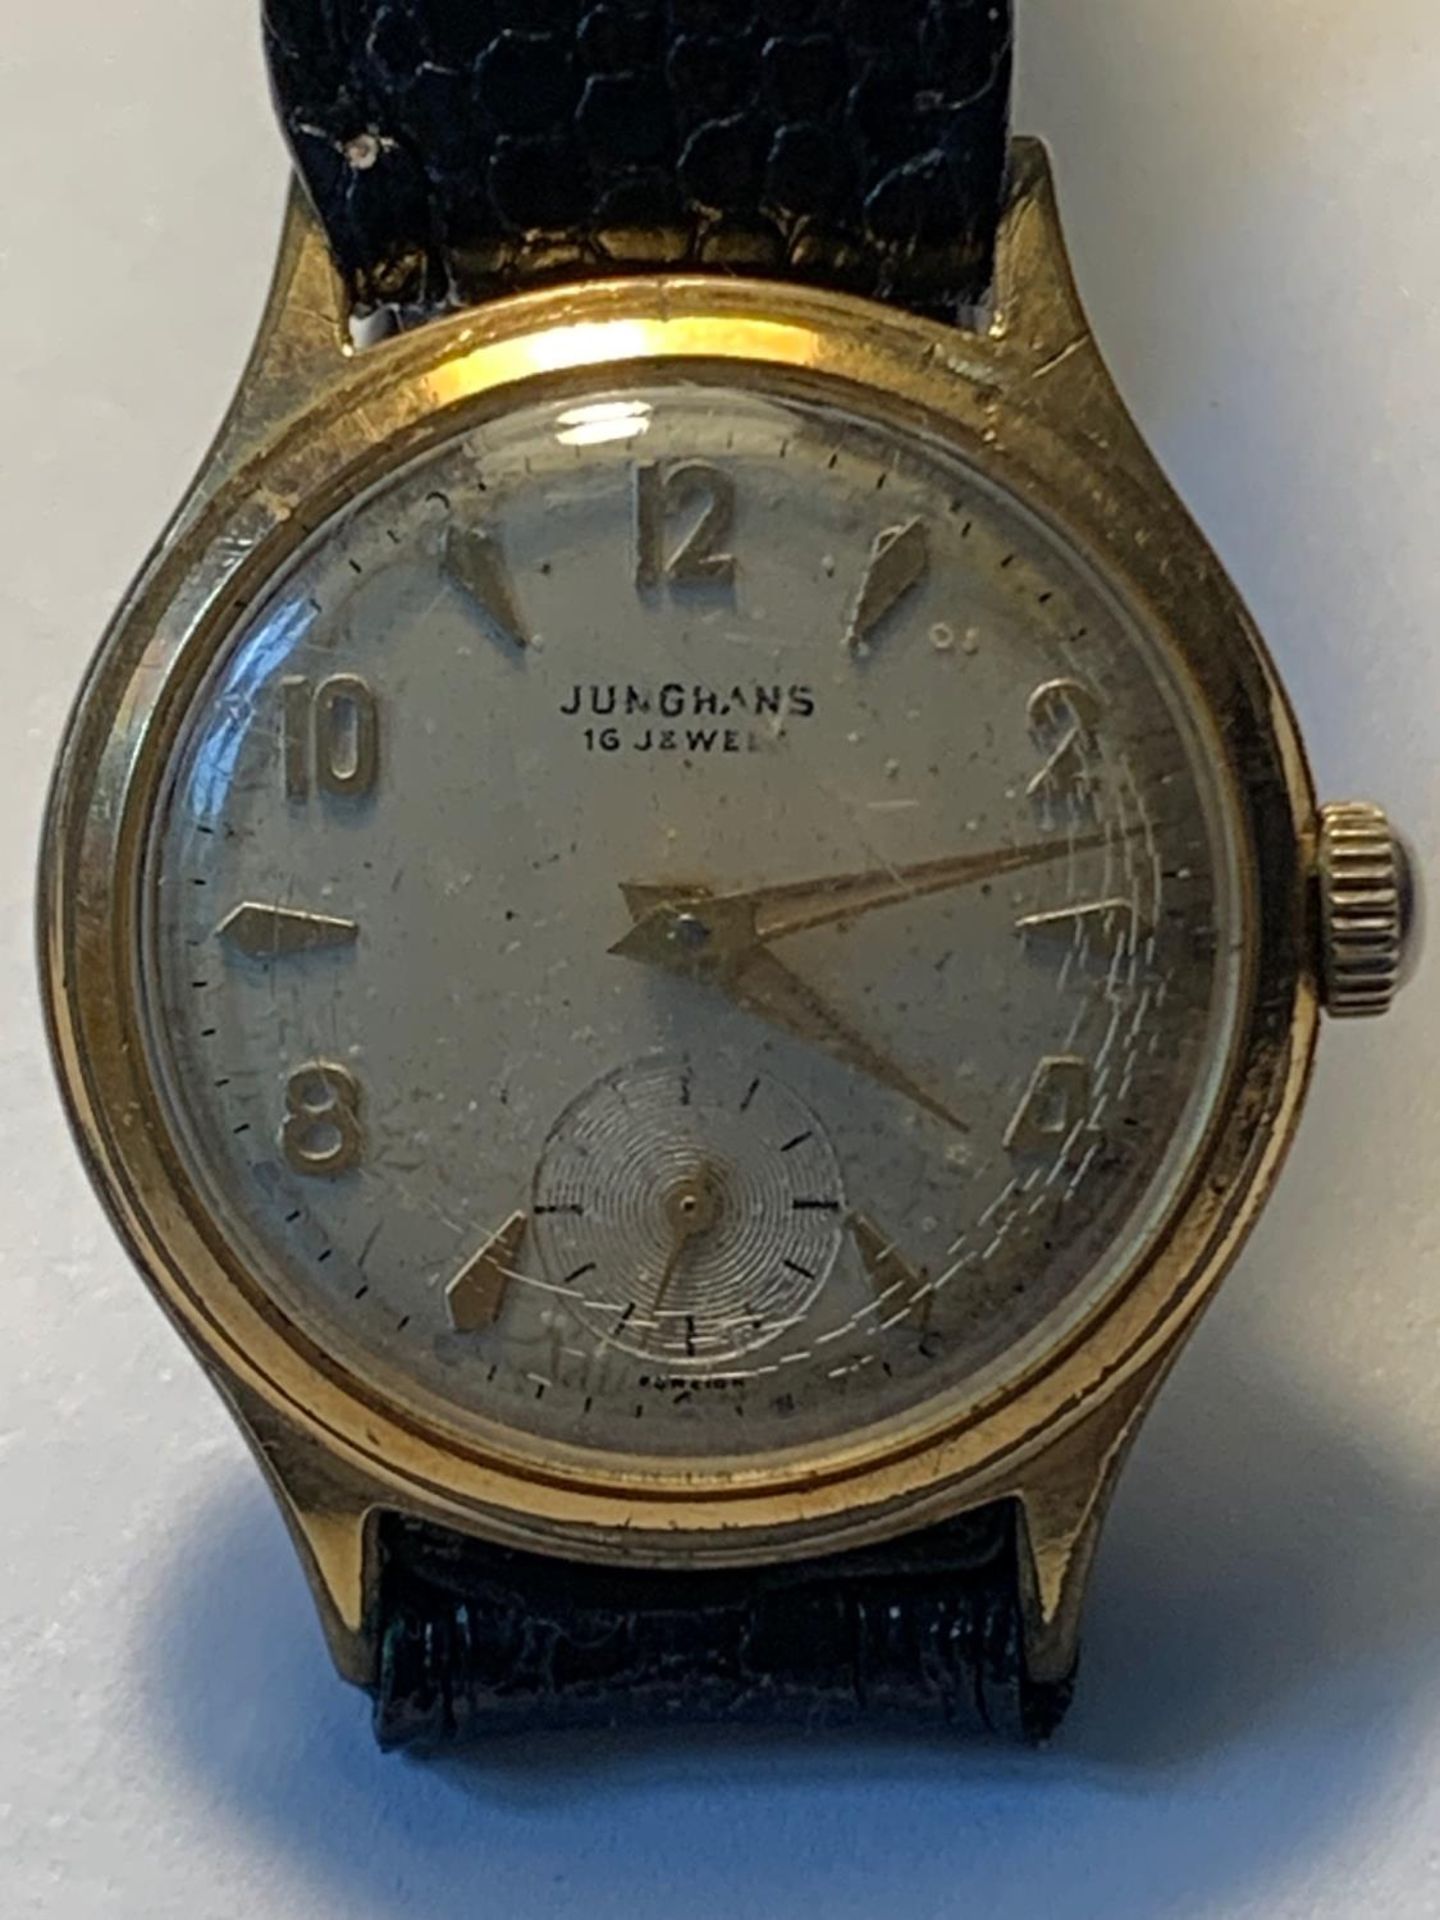 A 1960'S JUNGHANS 16 JEWEL WRIST WATCH WITH SUB DIAL AND BLACK LEATHER STRAP. SEEN WORKING BUT NO - Image 2 of 3